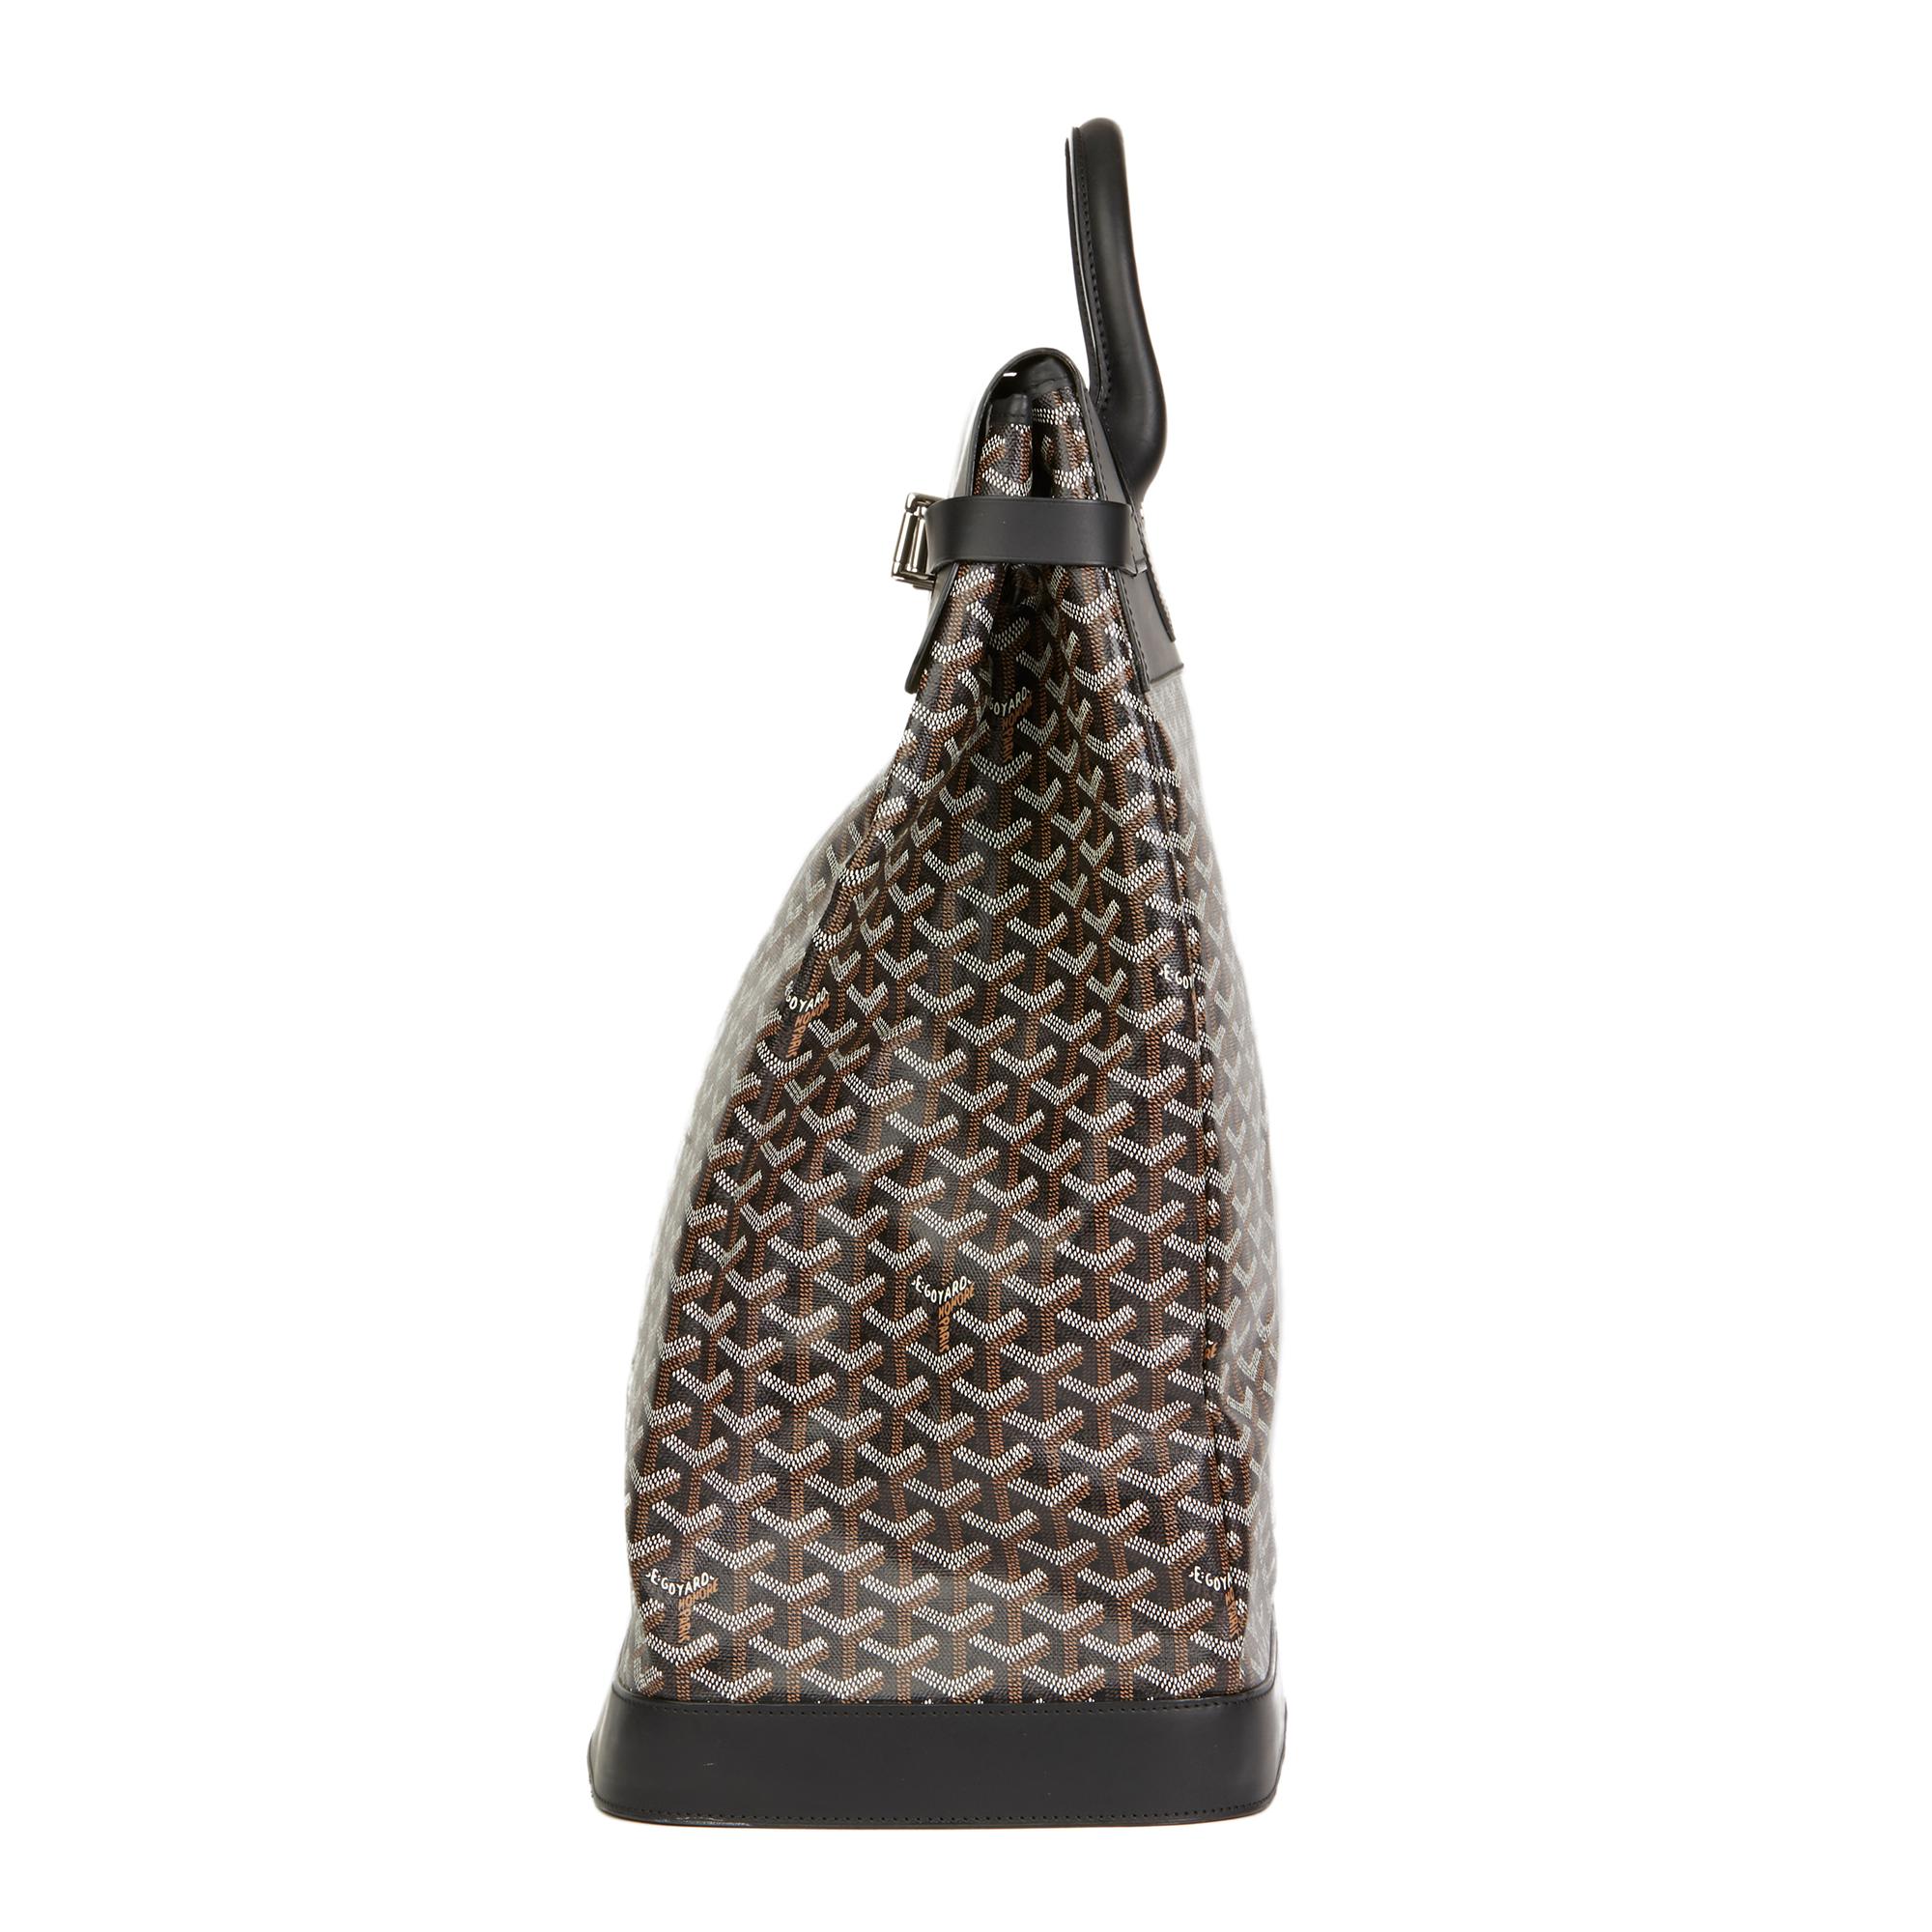 GOYARD
Black Chevron Coated Canvas Steamer

Reference: HB2563
Serial Number: ATN 020156
Age (Circa): 2010
Authenticity Details: Serial Stamp (Made in France)
Gender: Unisex
Type: Top Handle, Travel

Colour: Black
Hardware: Silver 
Material(s):